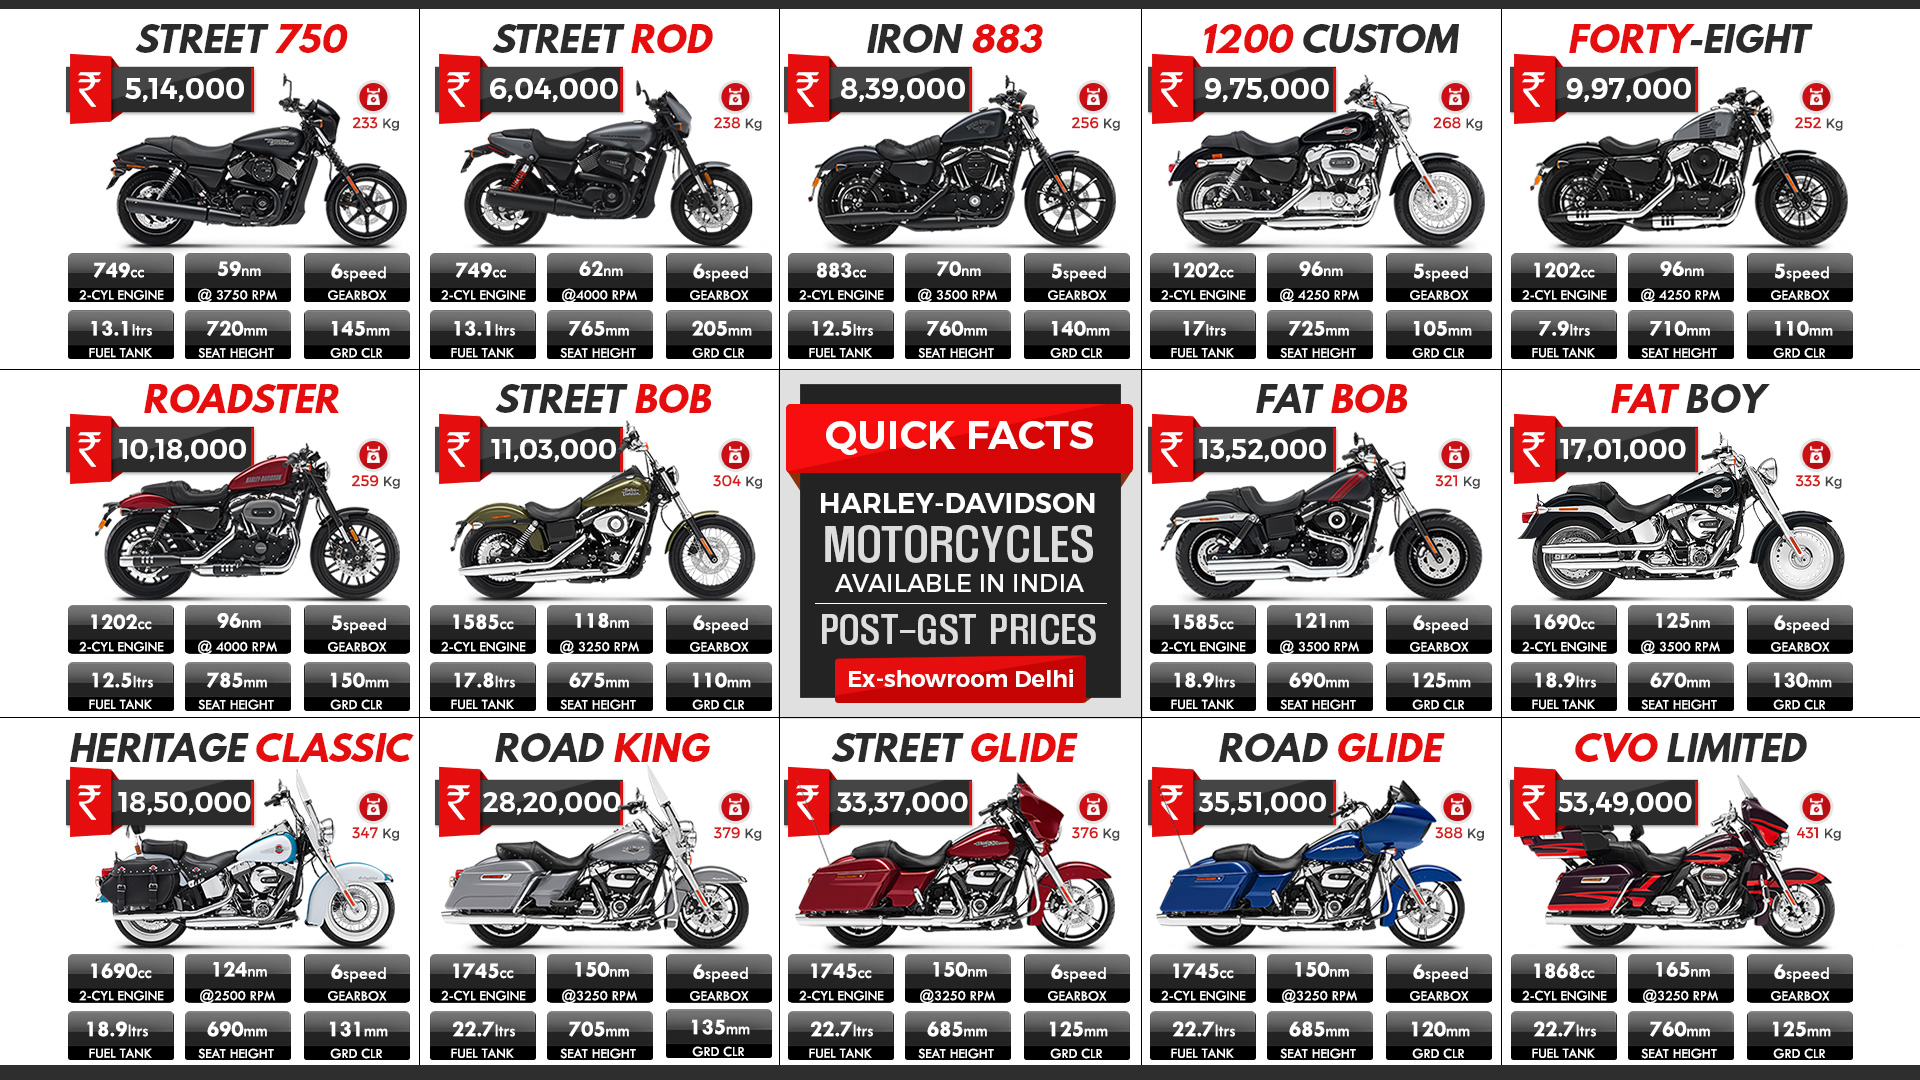 HarleyDavidson Motorcycles Available in India (Full Lineup) PostGST